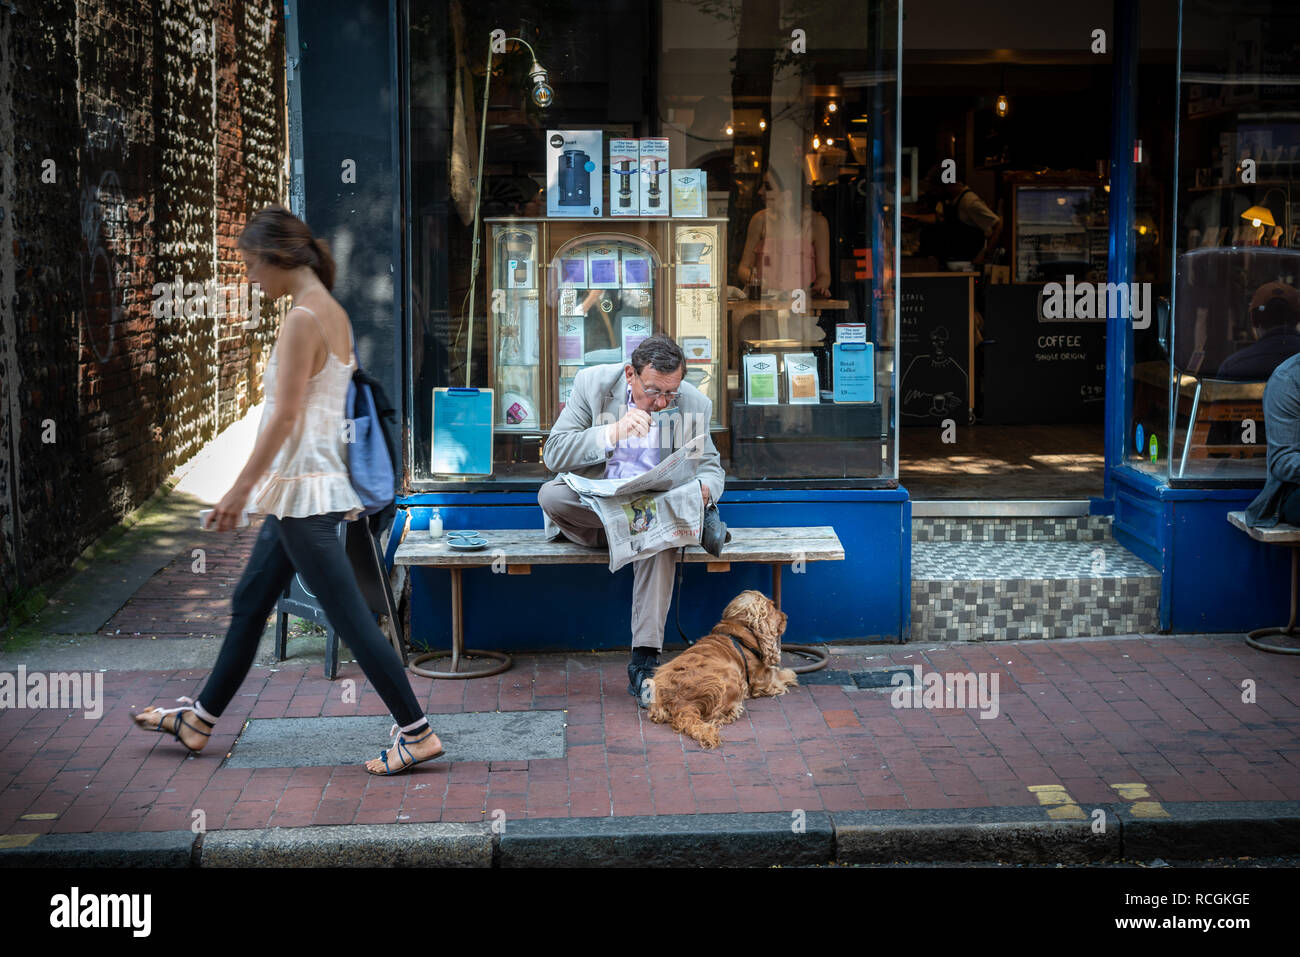 A man drinks coffee and reads a newspaper with a dog at his feet while sat outside a coffee shop in Brighton, East Sussex, England. Stock Photo